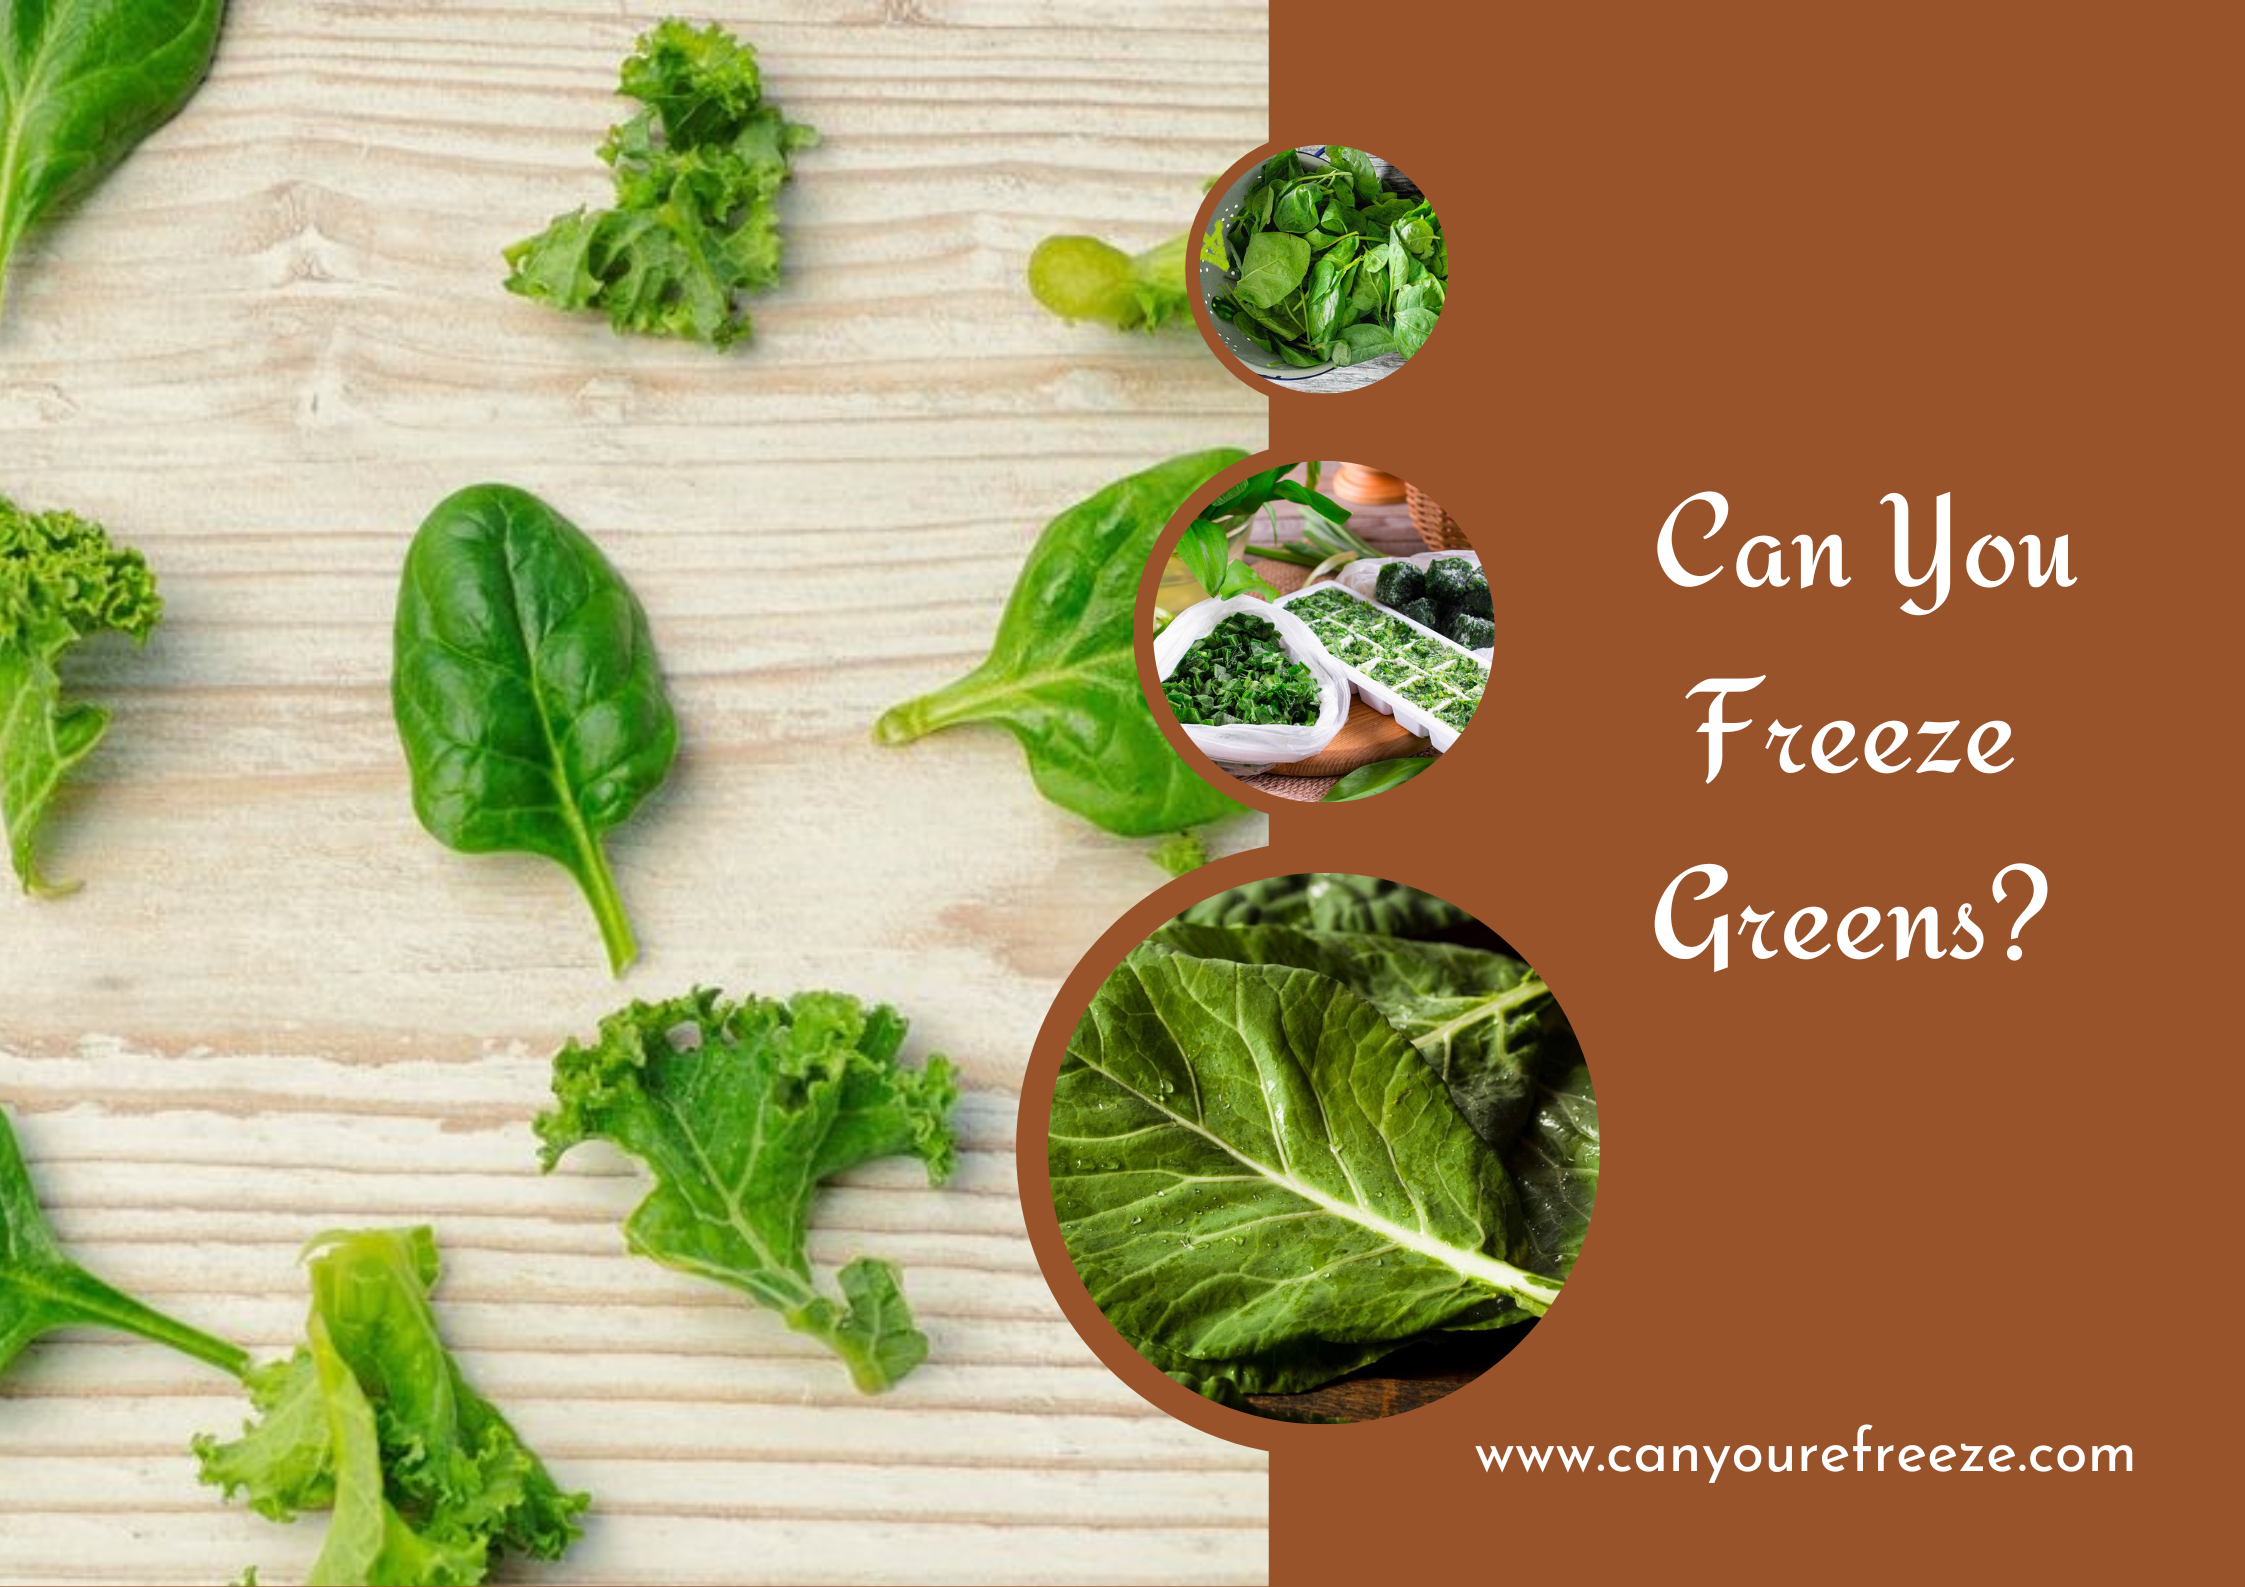 Can You Freeze Greens